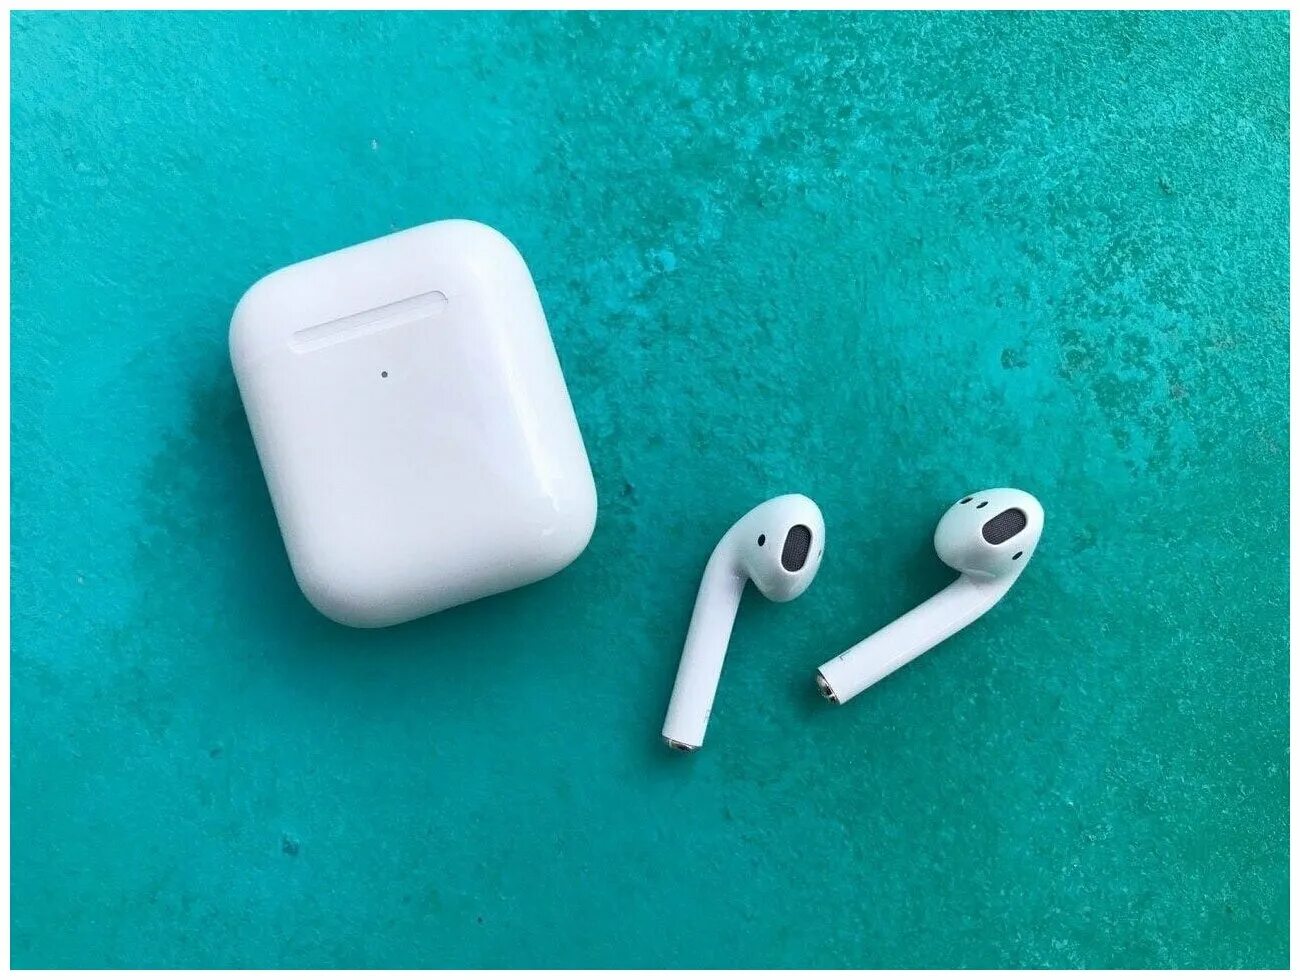 Airpods pods. Apple AIRPODS 2. Наушники беспроводные Apple AIRPODS 2. Наушники беспроводные Apple AIRPODS 1. Apple наушники беспроводные AIRPODS Pro Pro 2.